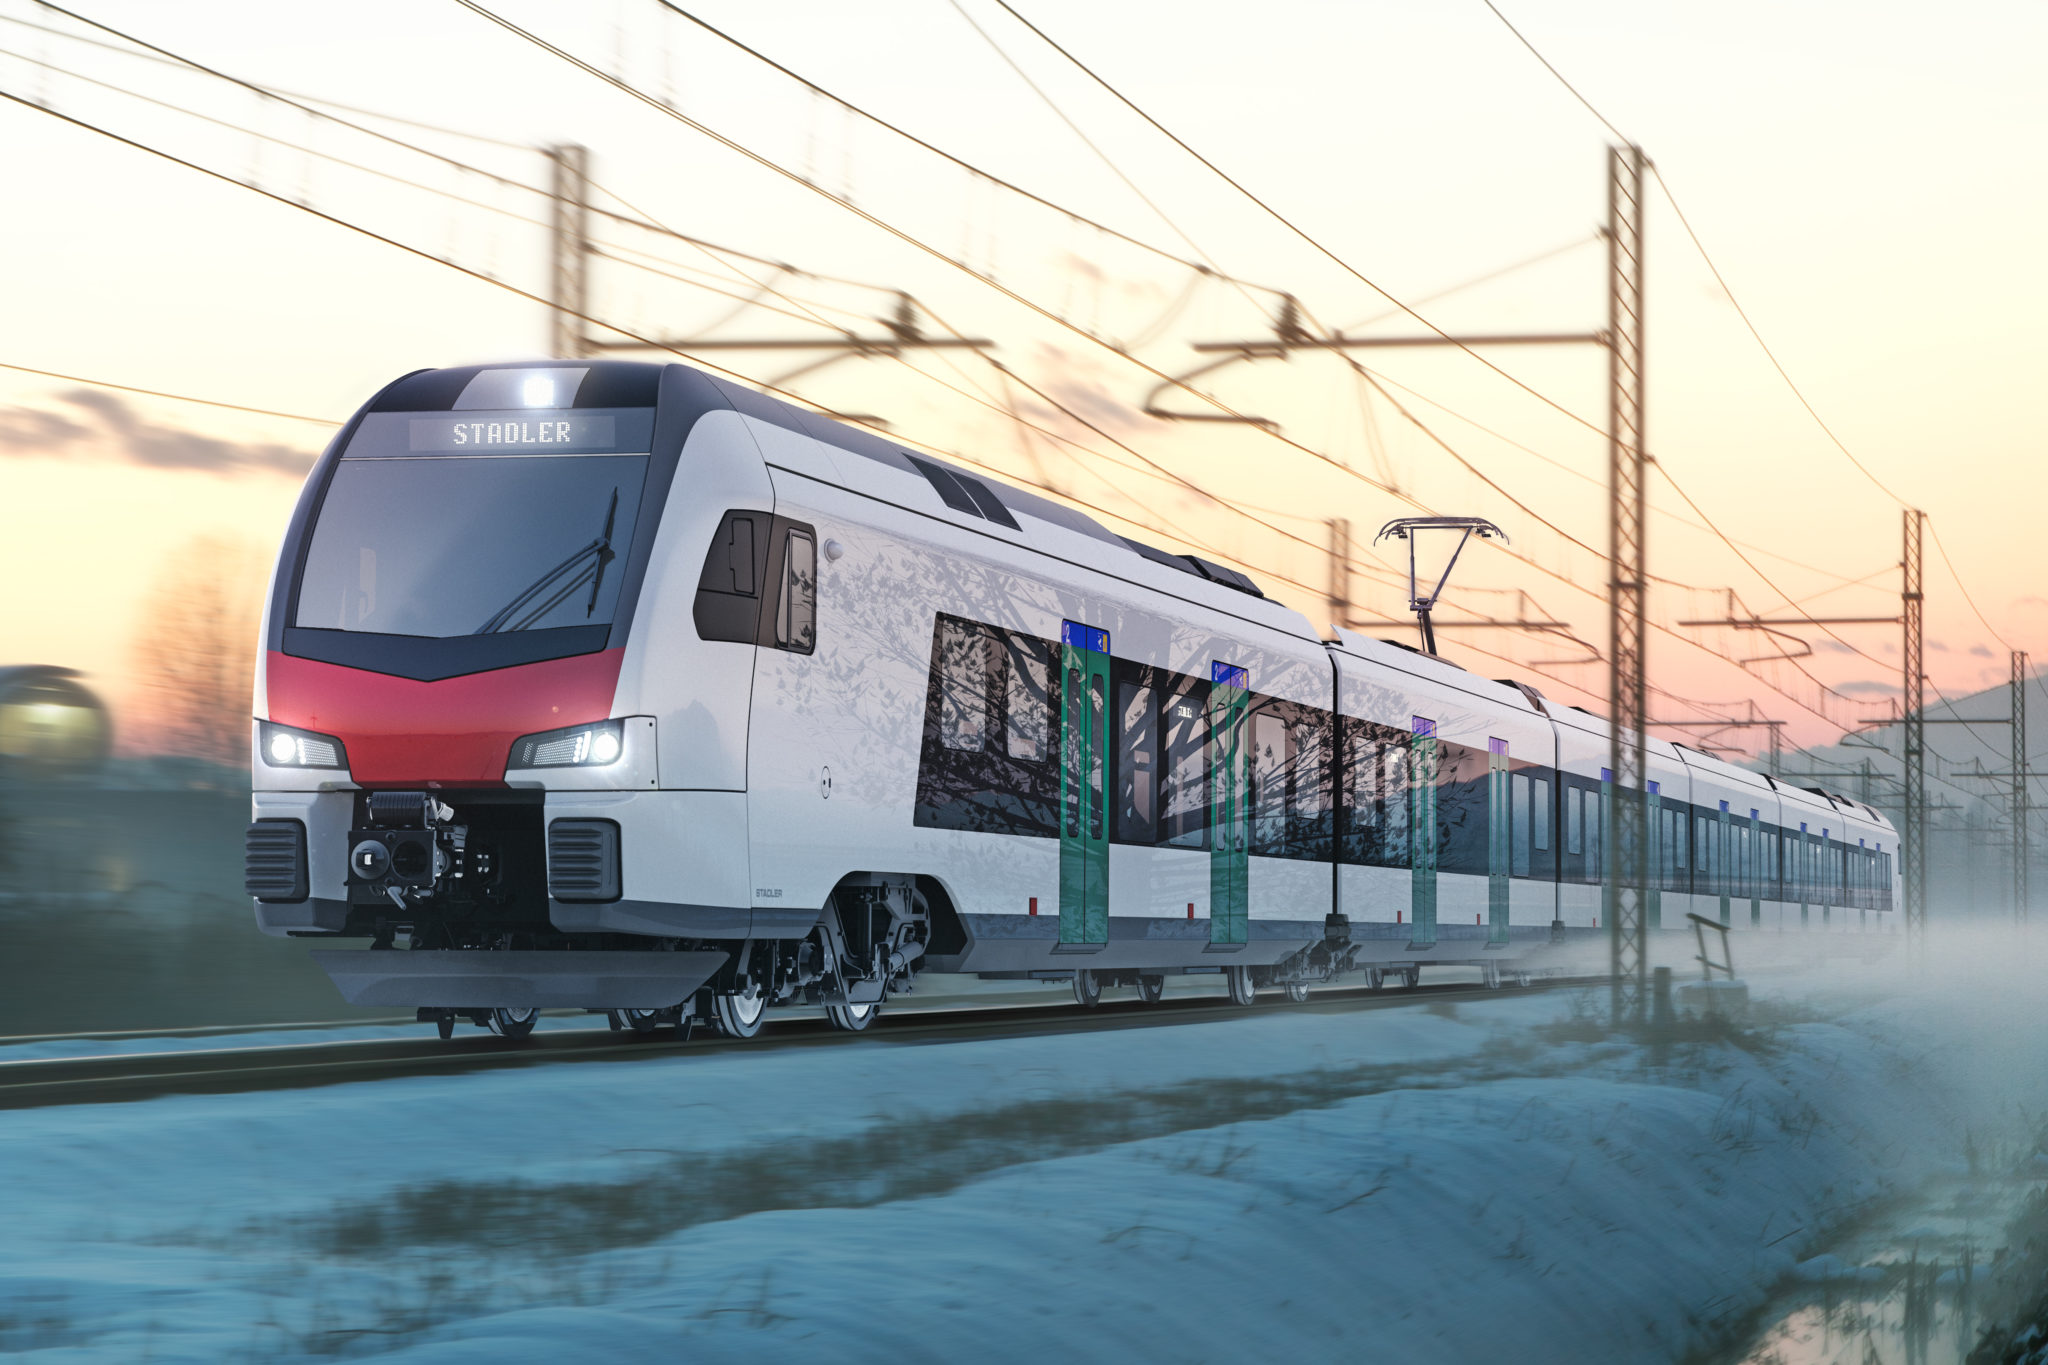 Rendering of one of the Stadler Ticino Lombardy trains